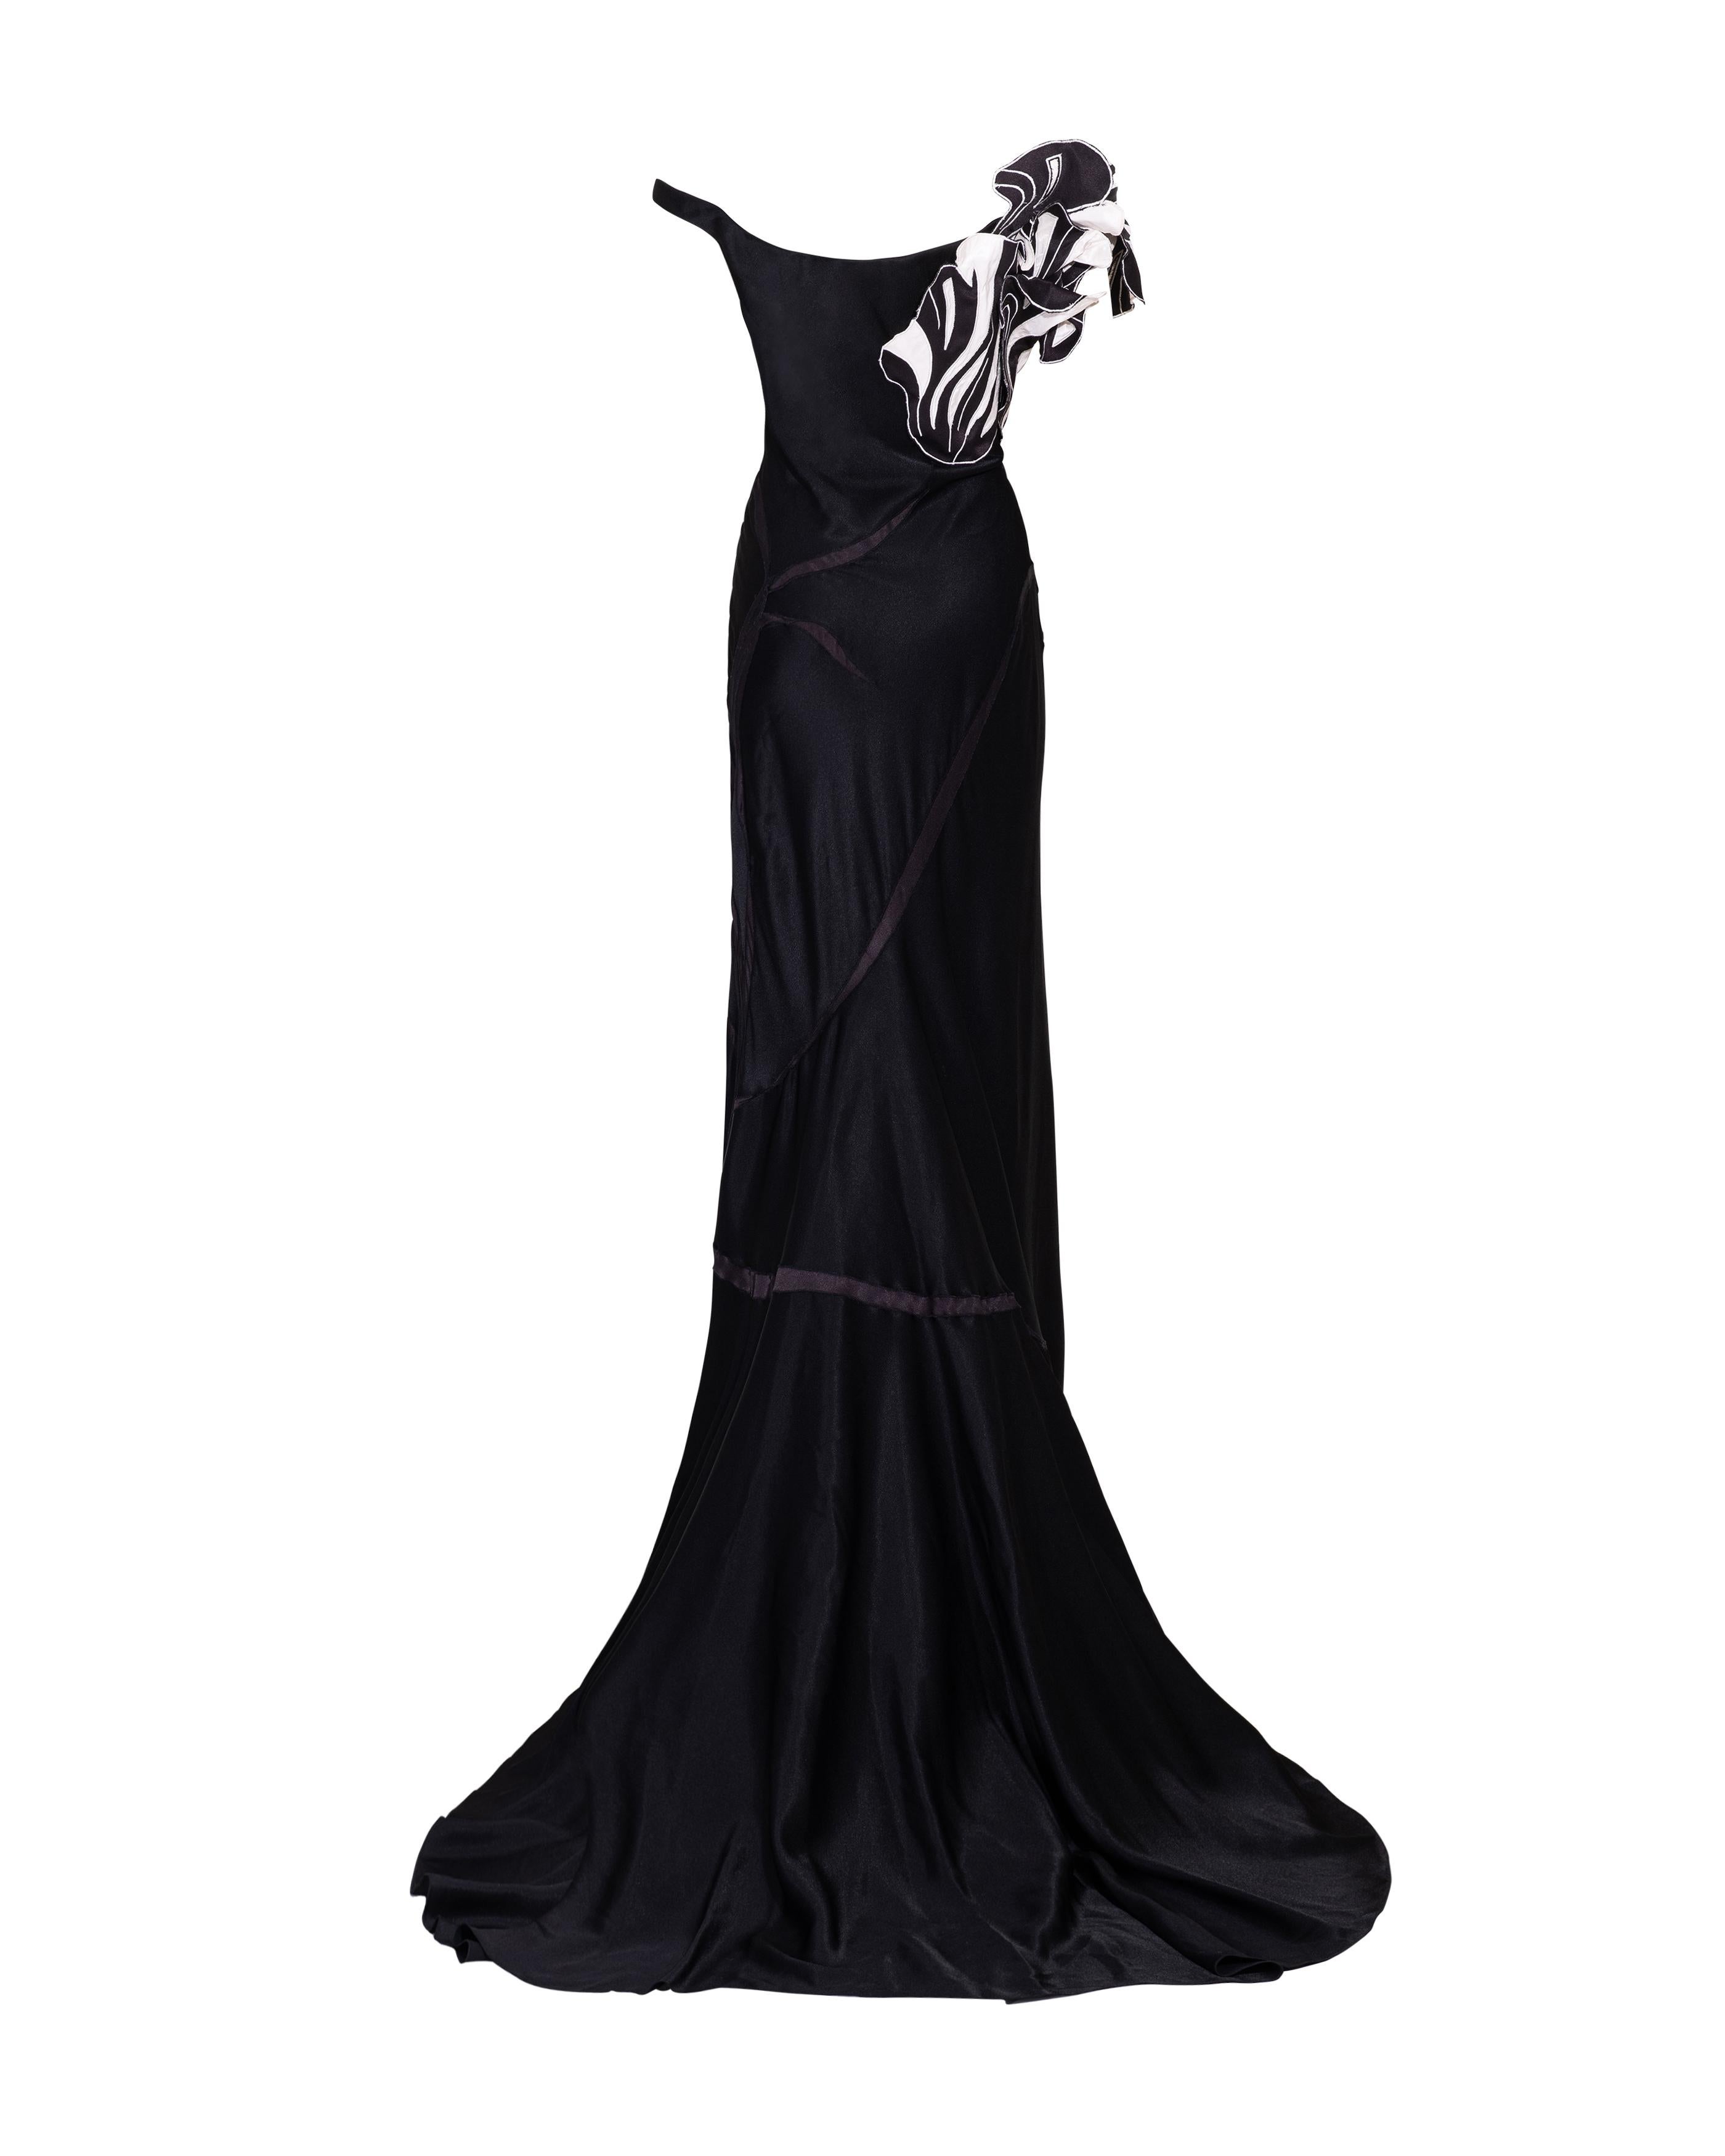 S/S 1996 John Galliano Black and White Sculptural Sleeve Gown with Train 1